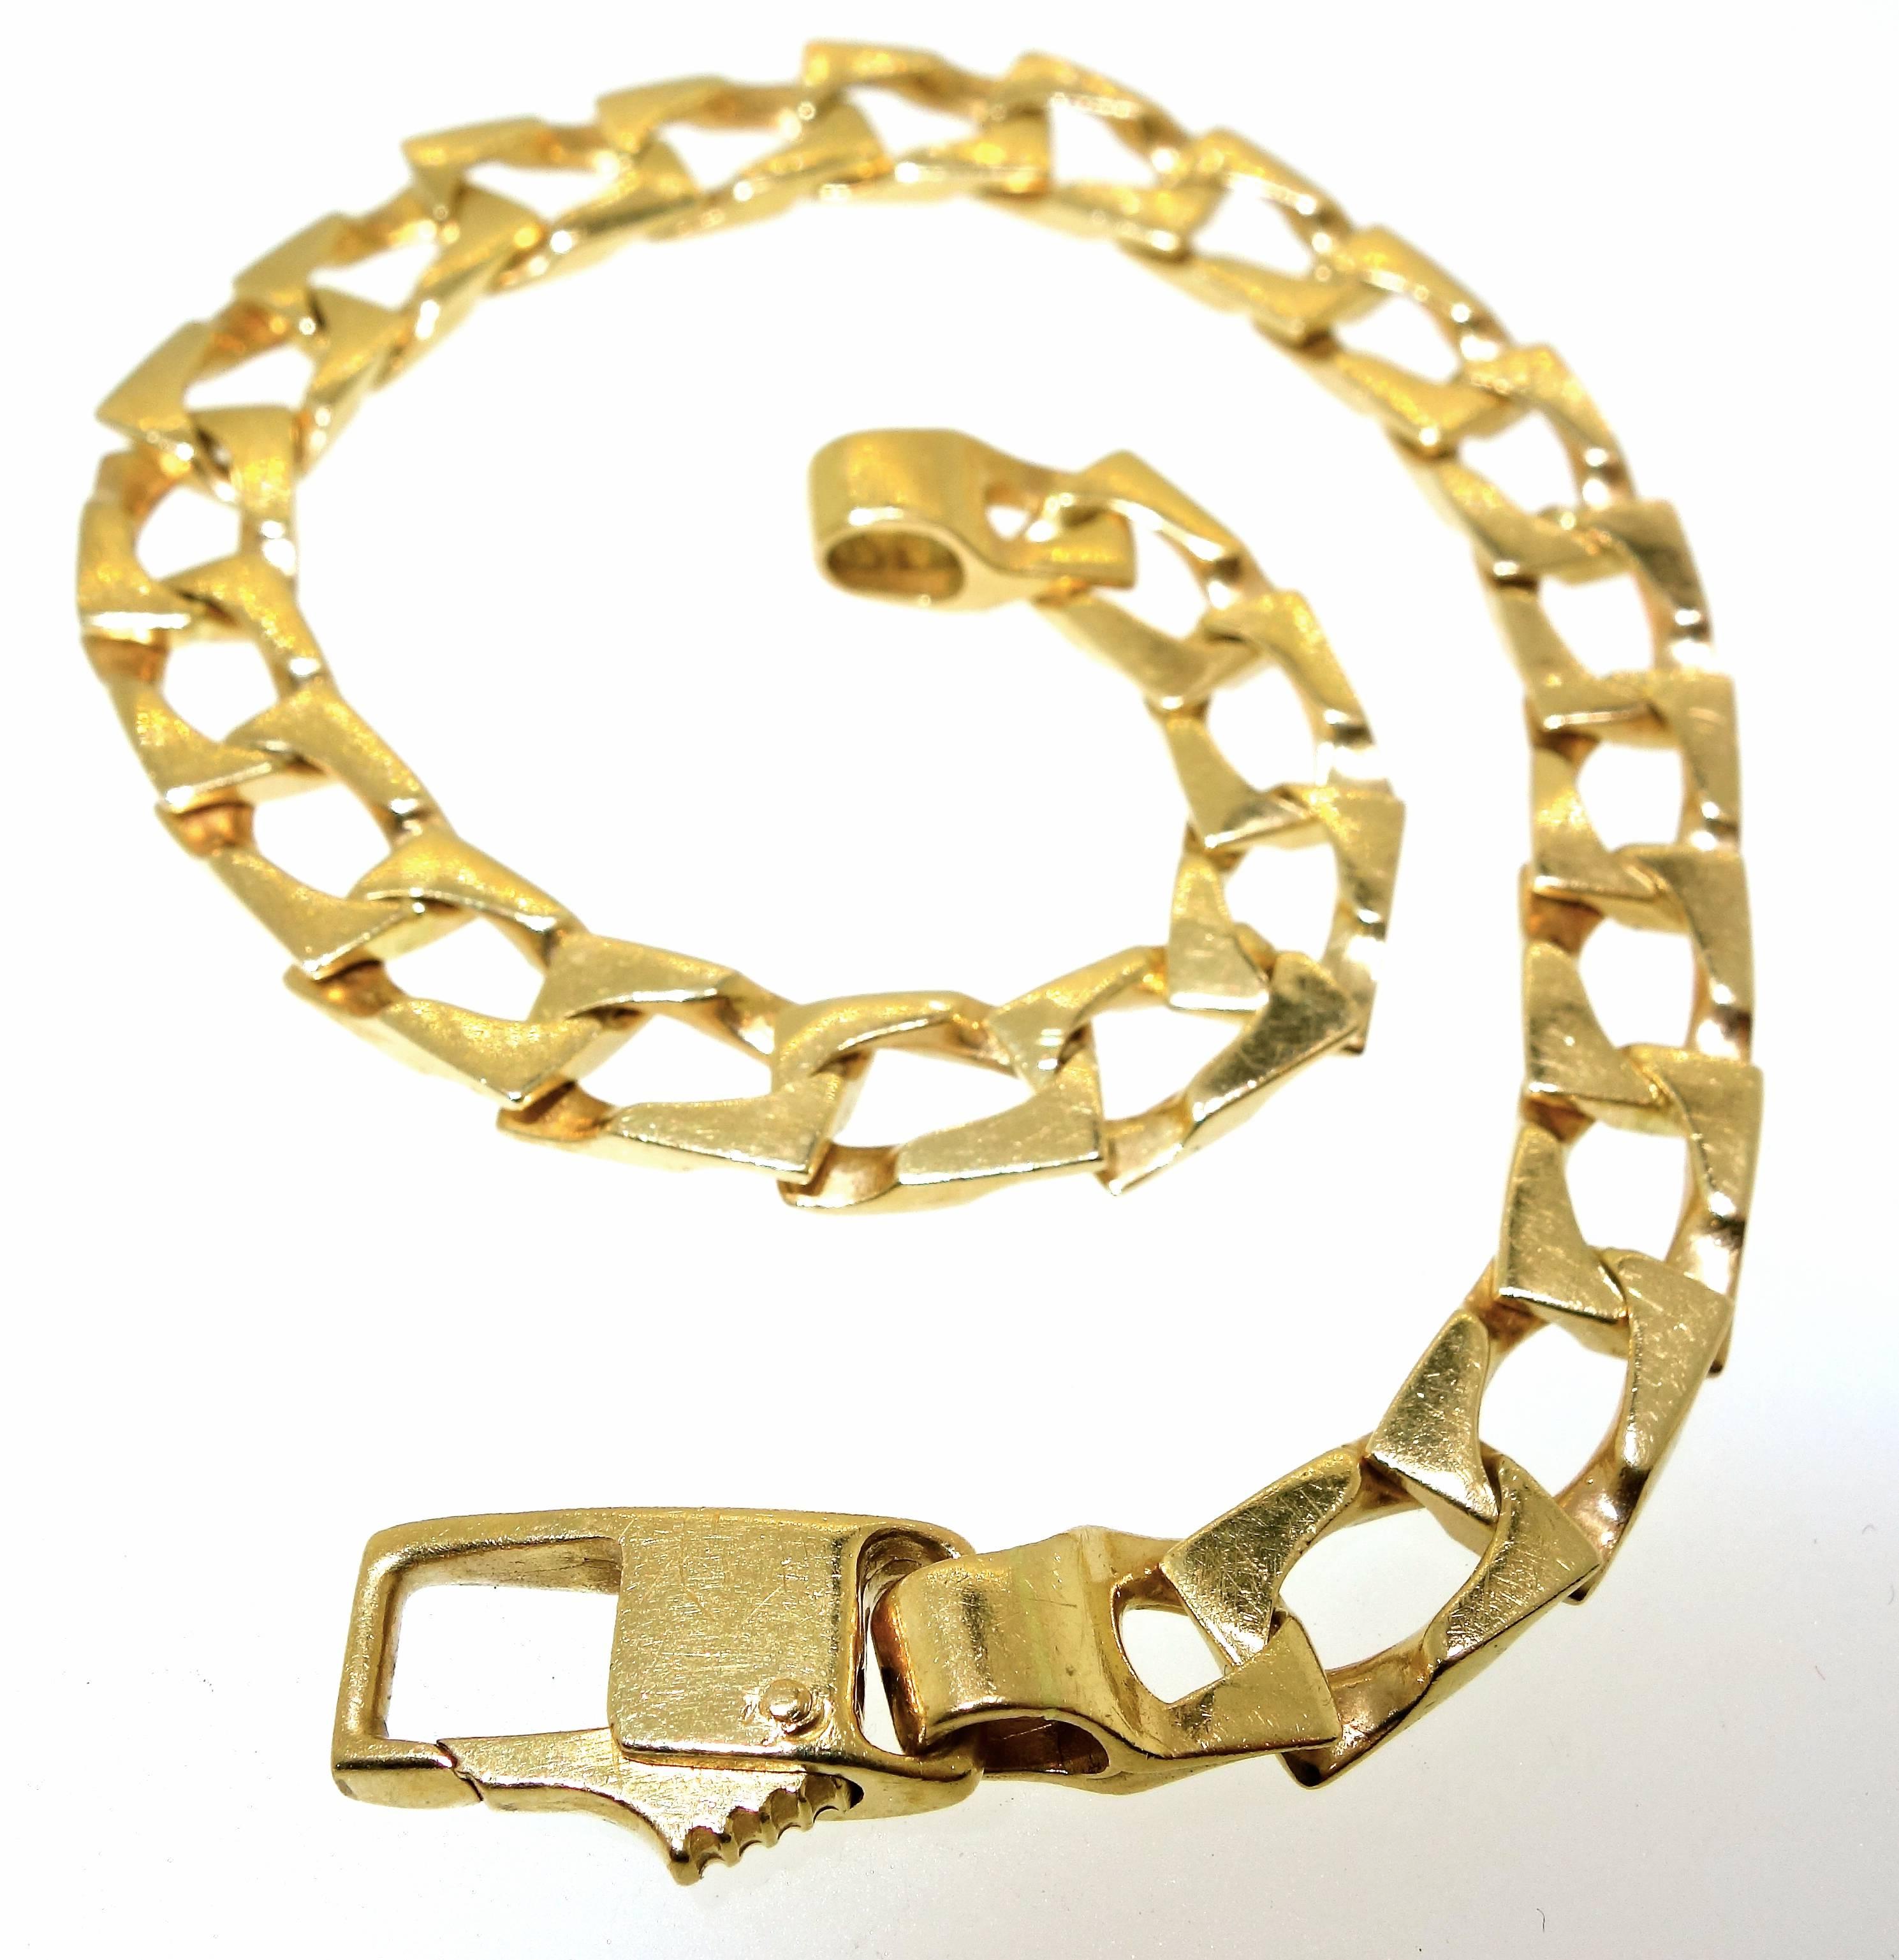 Nine inches in length and weighing 21.25 grams, this unusual link bracelet is great for a large wrist - either man or woman.  We are selling it close to its gold scrap value of $470.